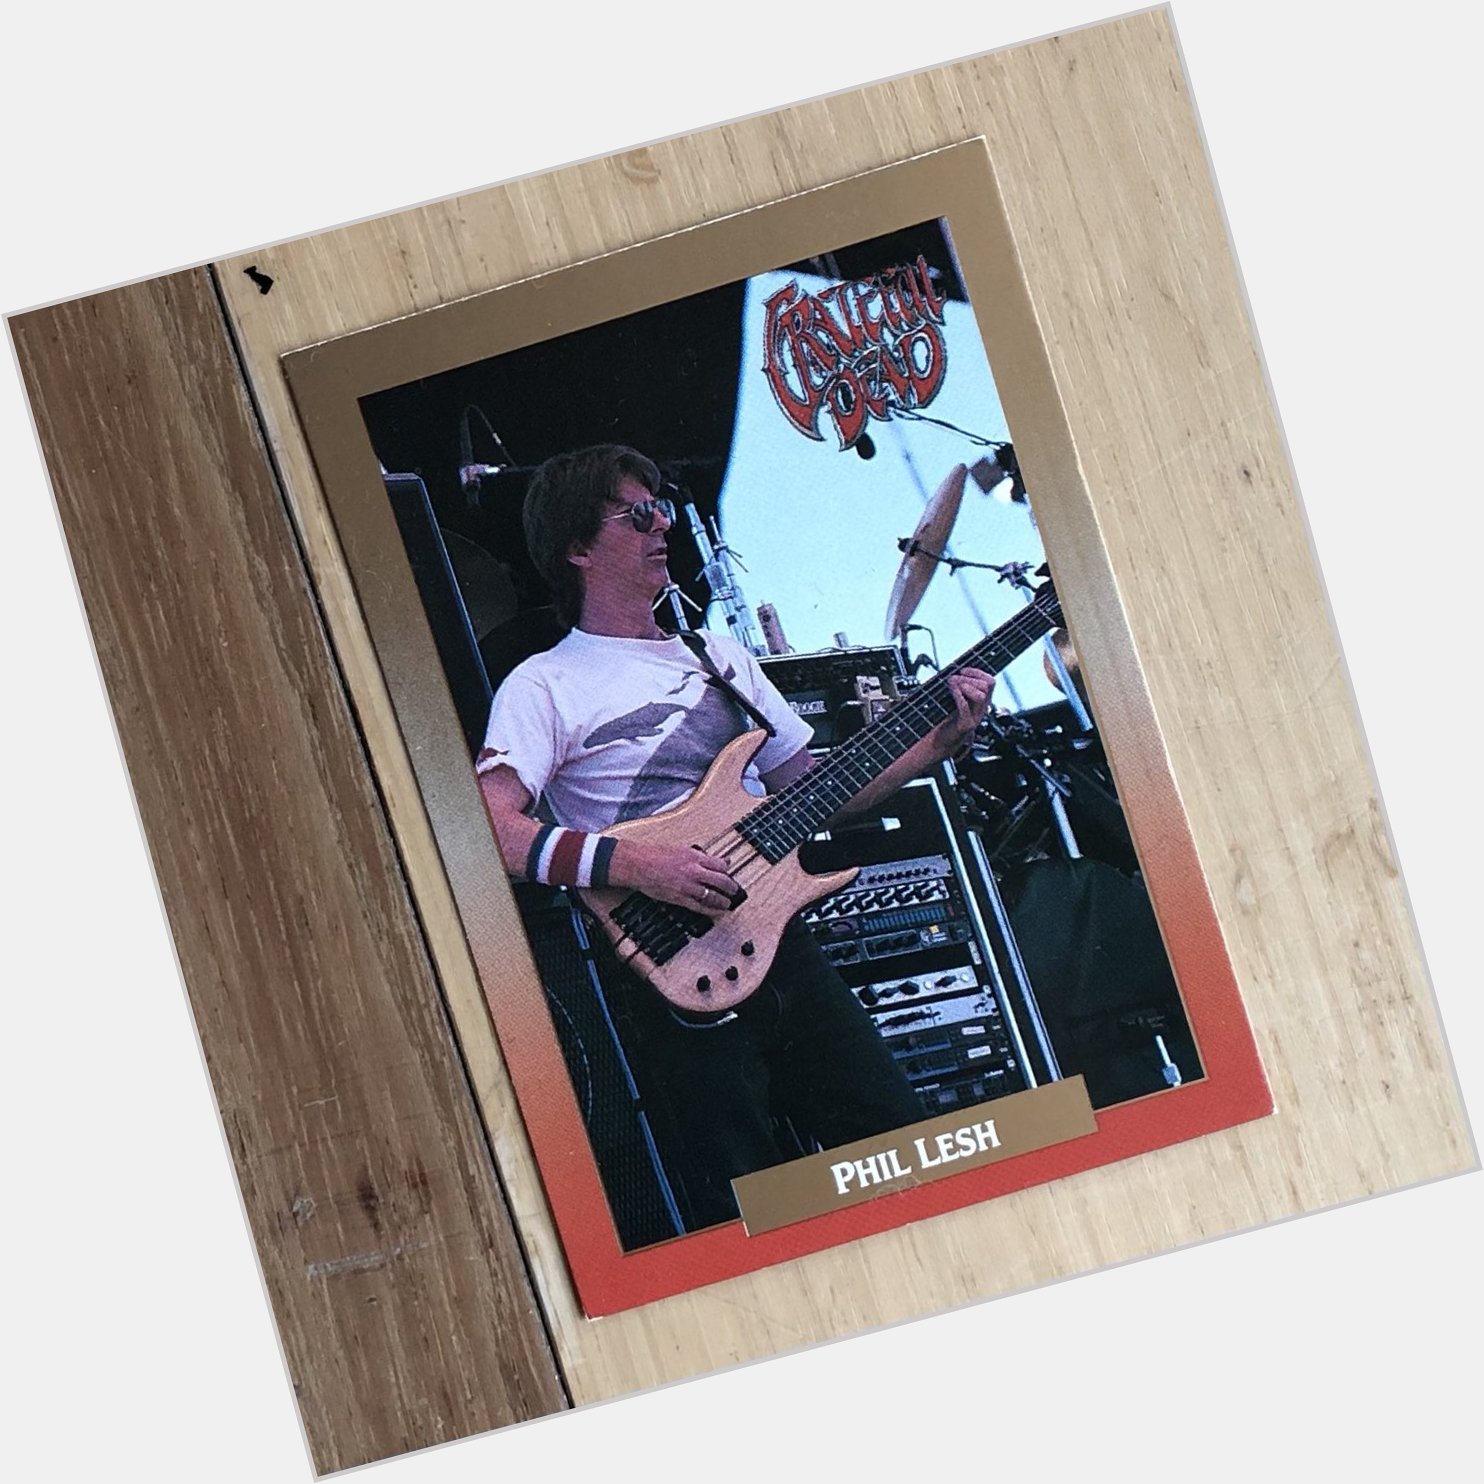 Happy Birthday to Phil Lesh!

1991 Brockum Rock Cards
Styled out as always 